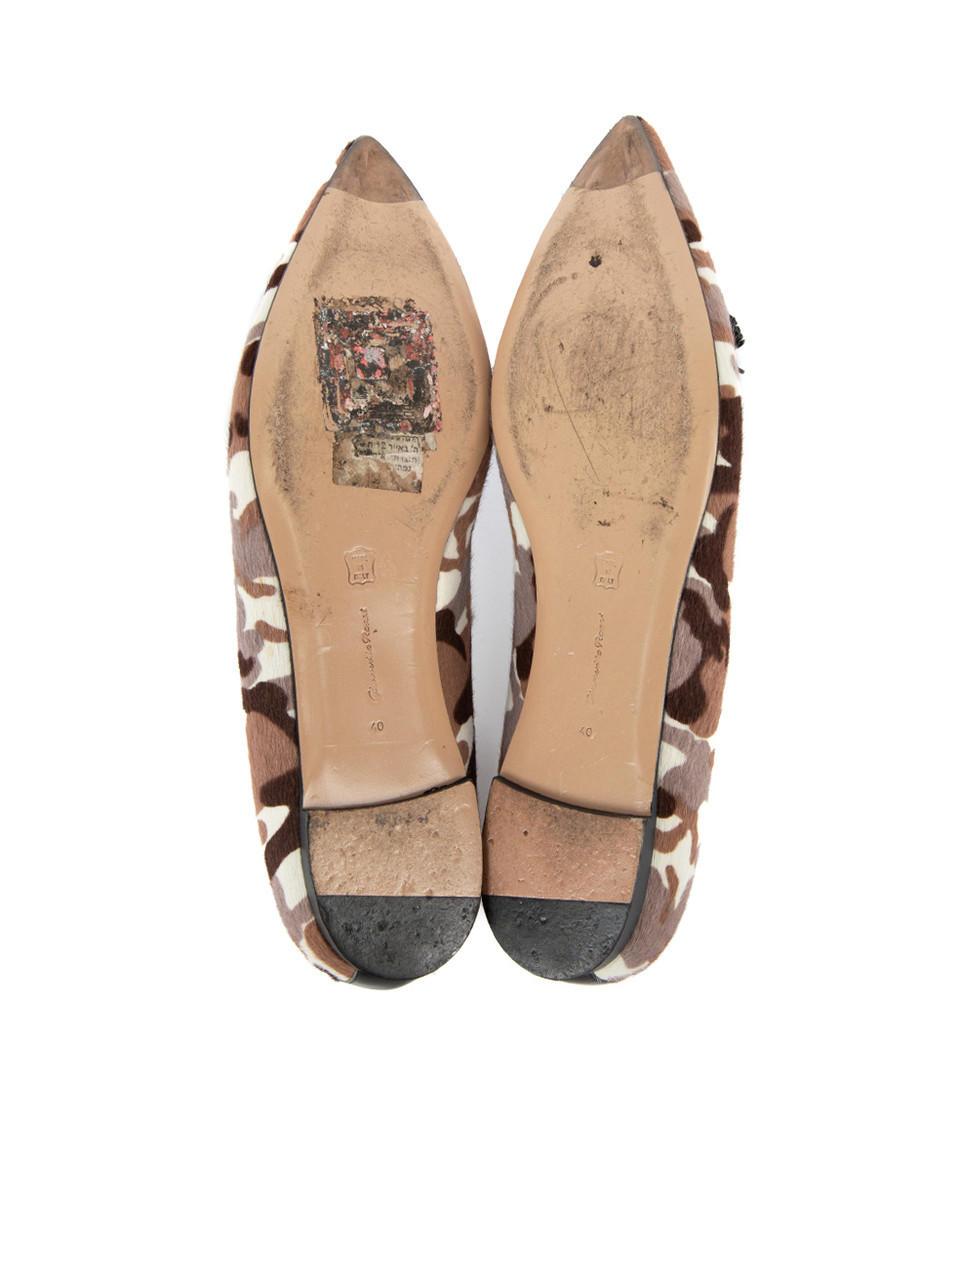 CONDITION is Very good. Minimal wear to flats is evident. Minimal wear to the outsole on this used Gianvitto Rossi designer resale item. Details Multicolour Pont hair calfskin Ballet flats Camouflage pattern Pointed toe Flat heel Tassel detail on